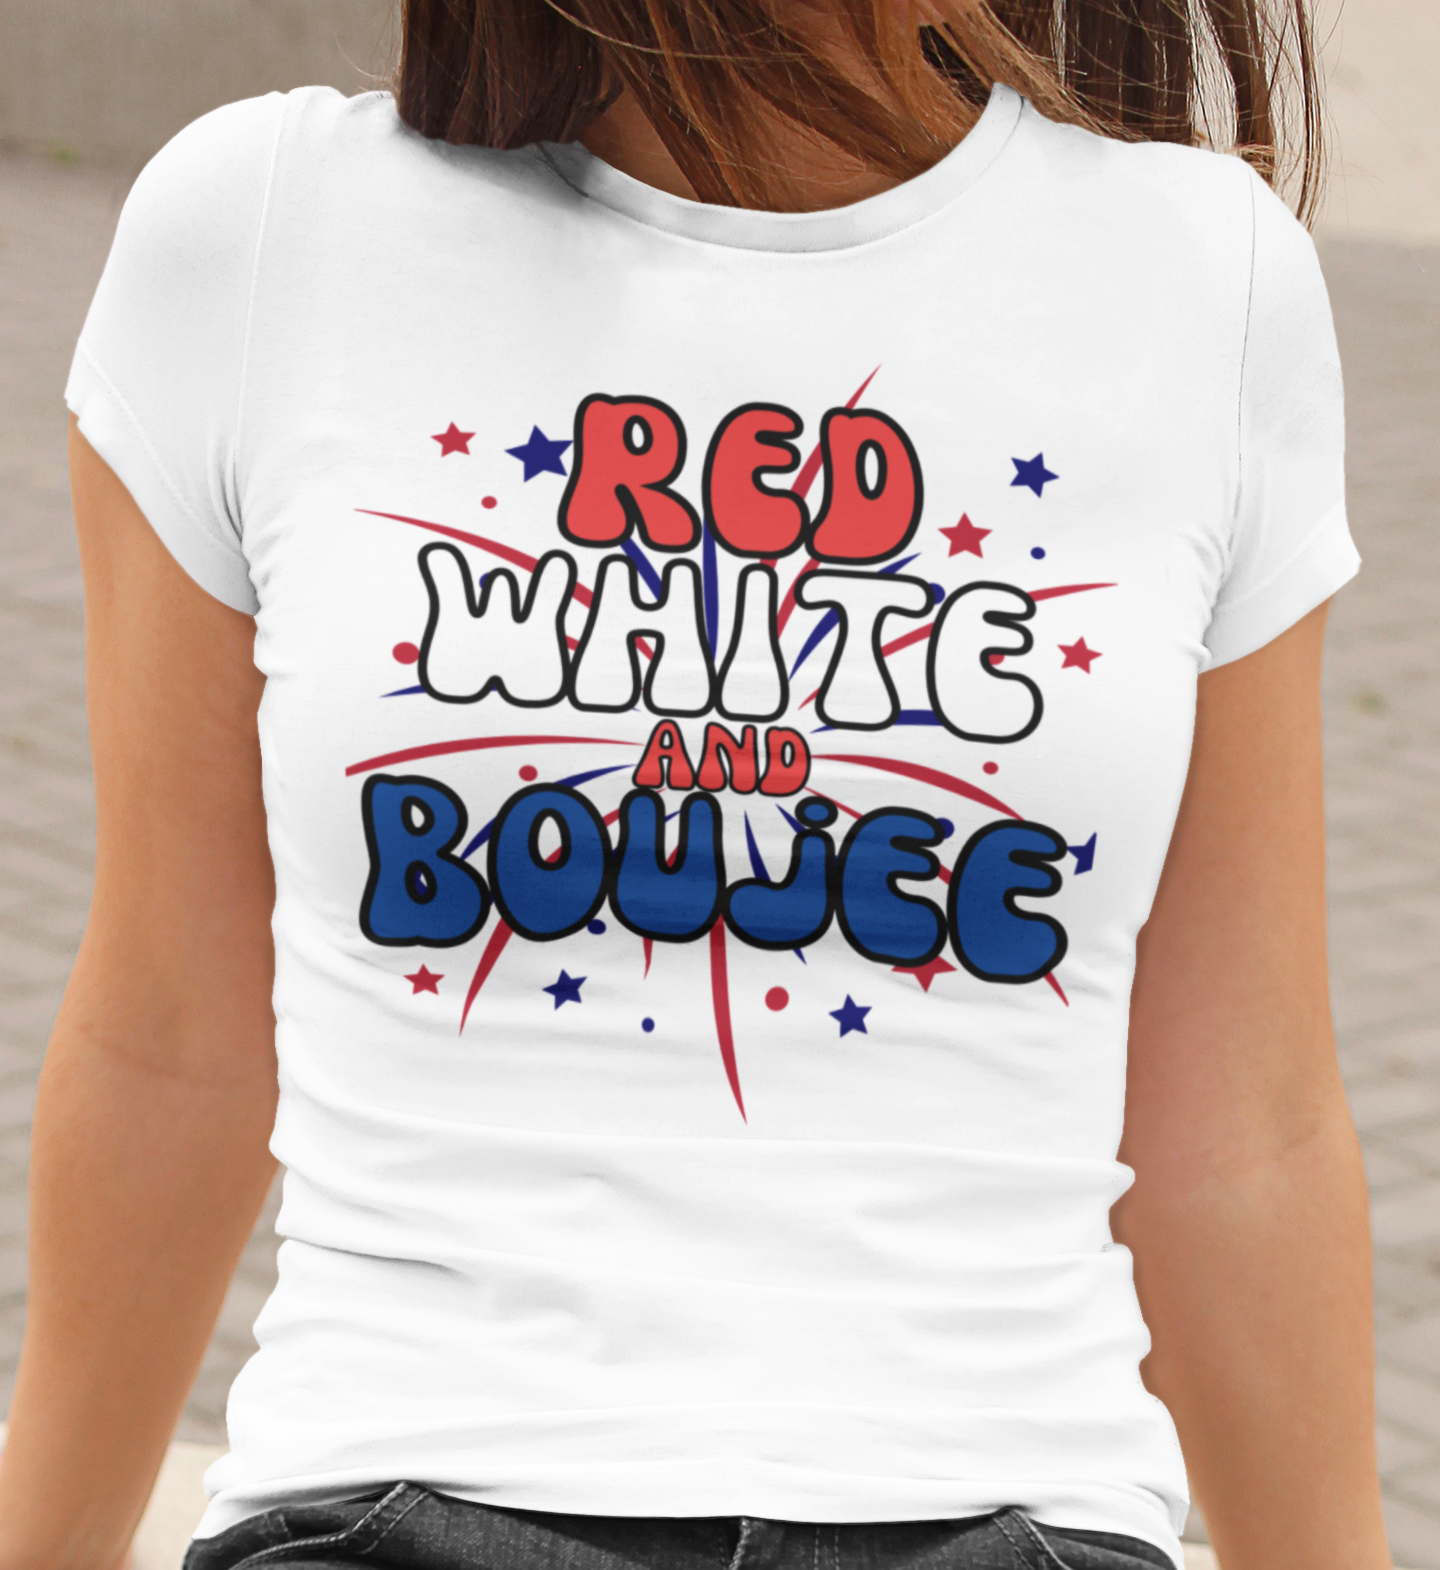 Red White & Boujee T-Shirt